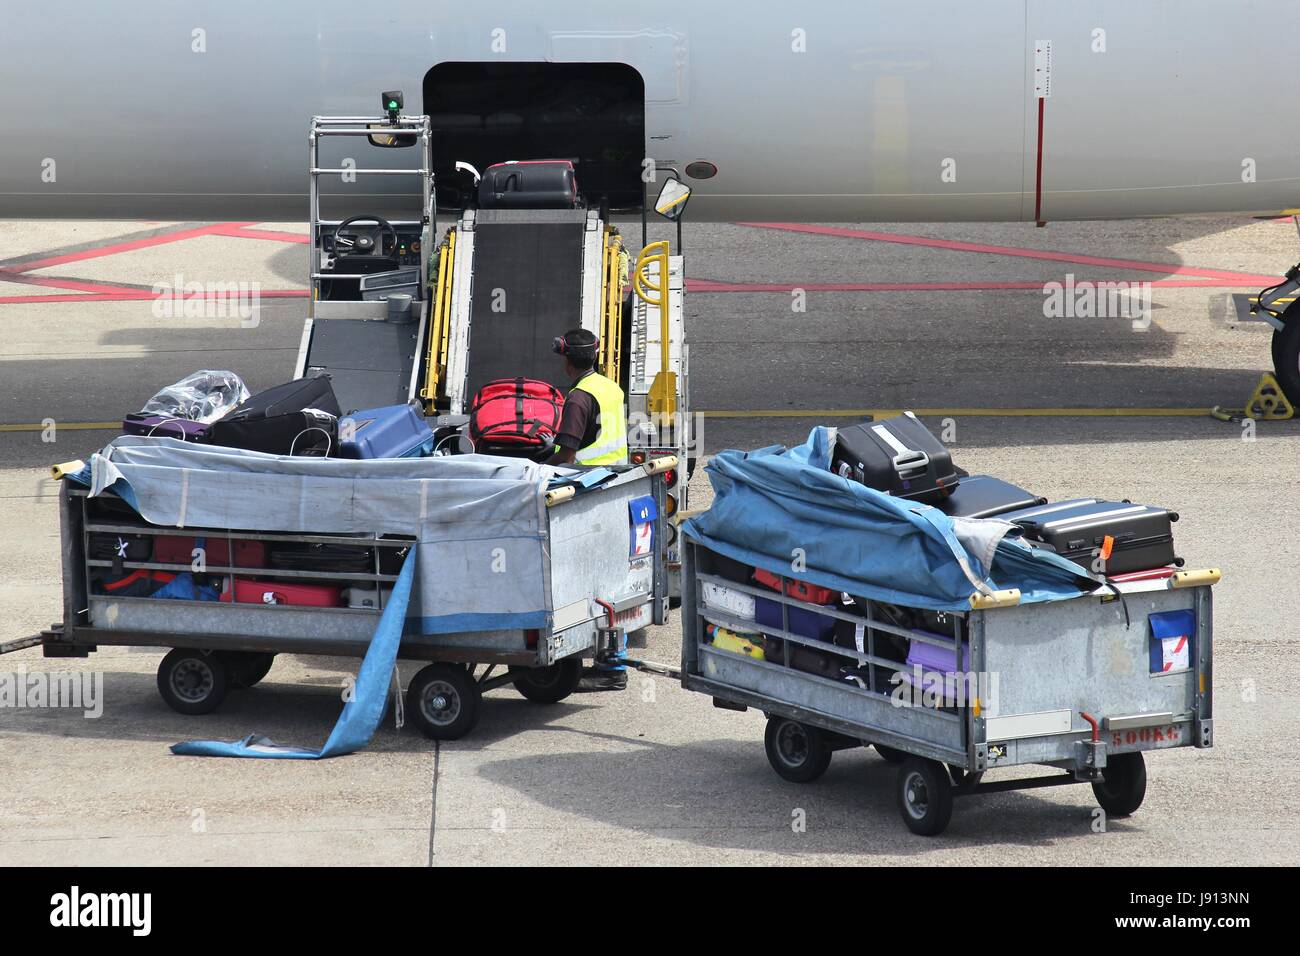 loose luggage being loaded into narrow body aircraft Stock Photo